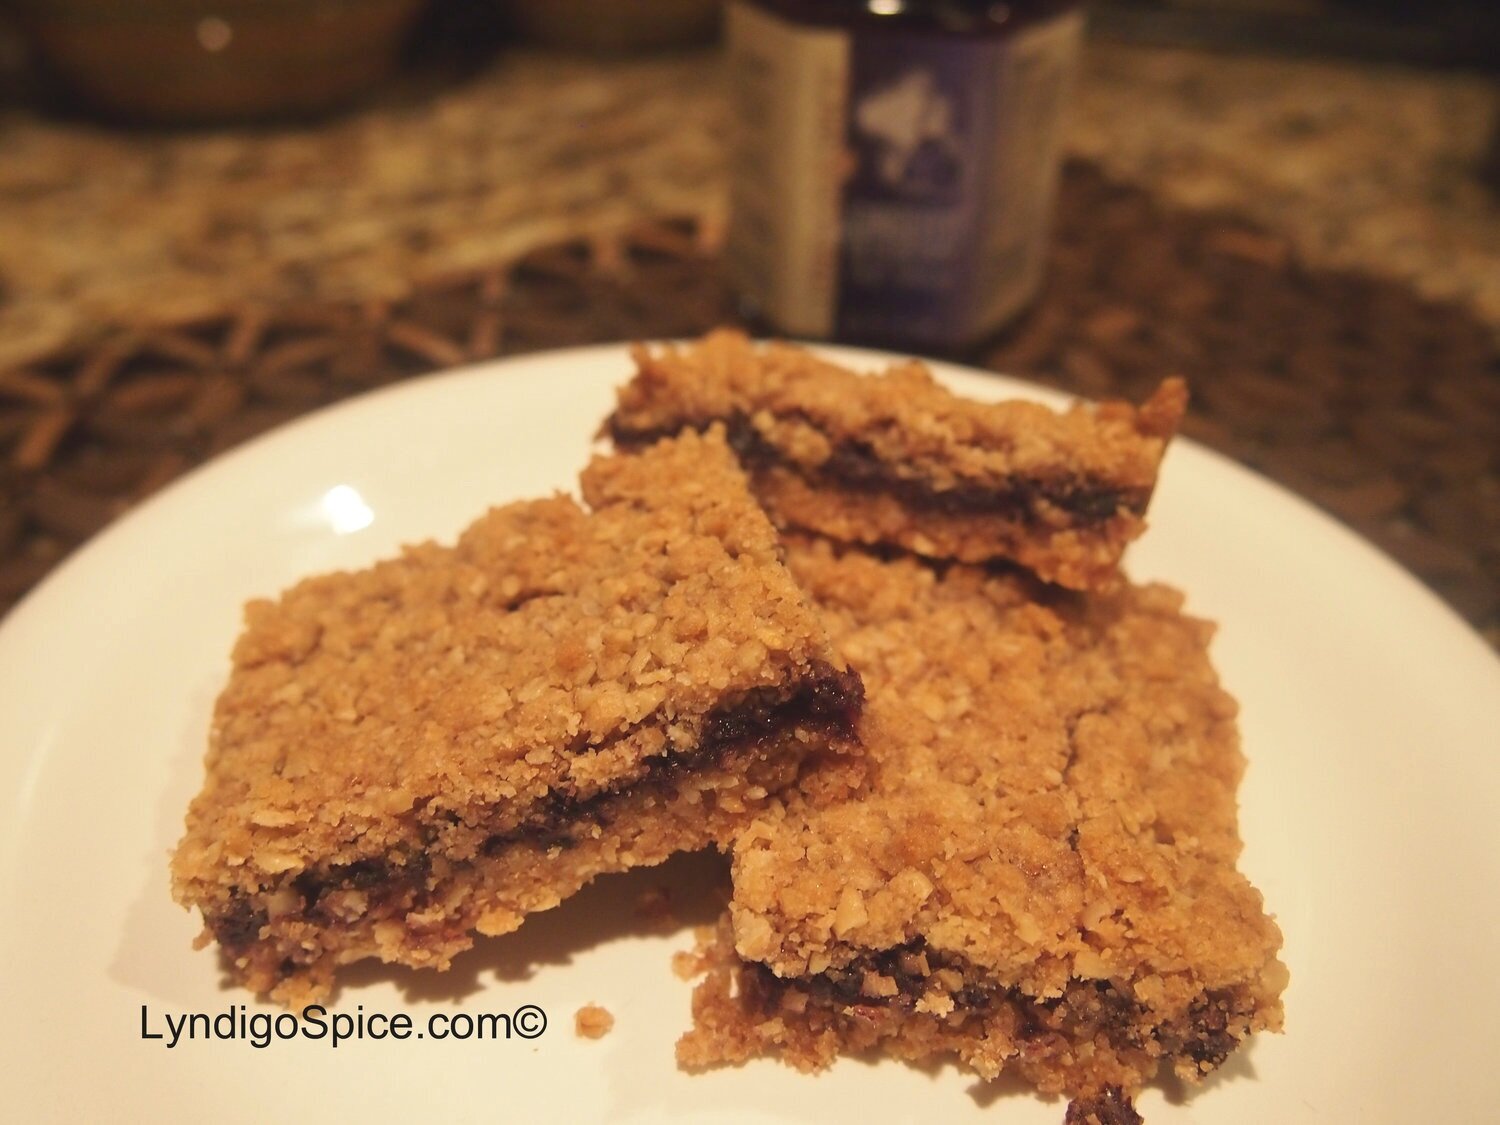 *Oatmeal Breakfast Bars with Gingery Blueberry Fruit Spread